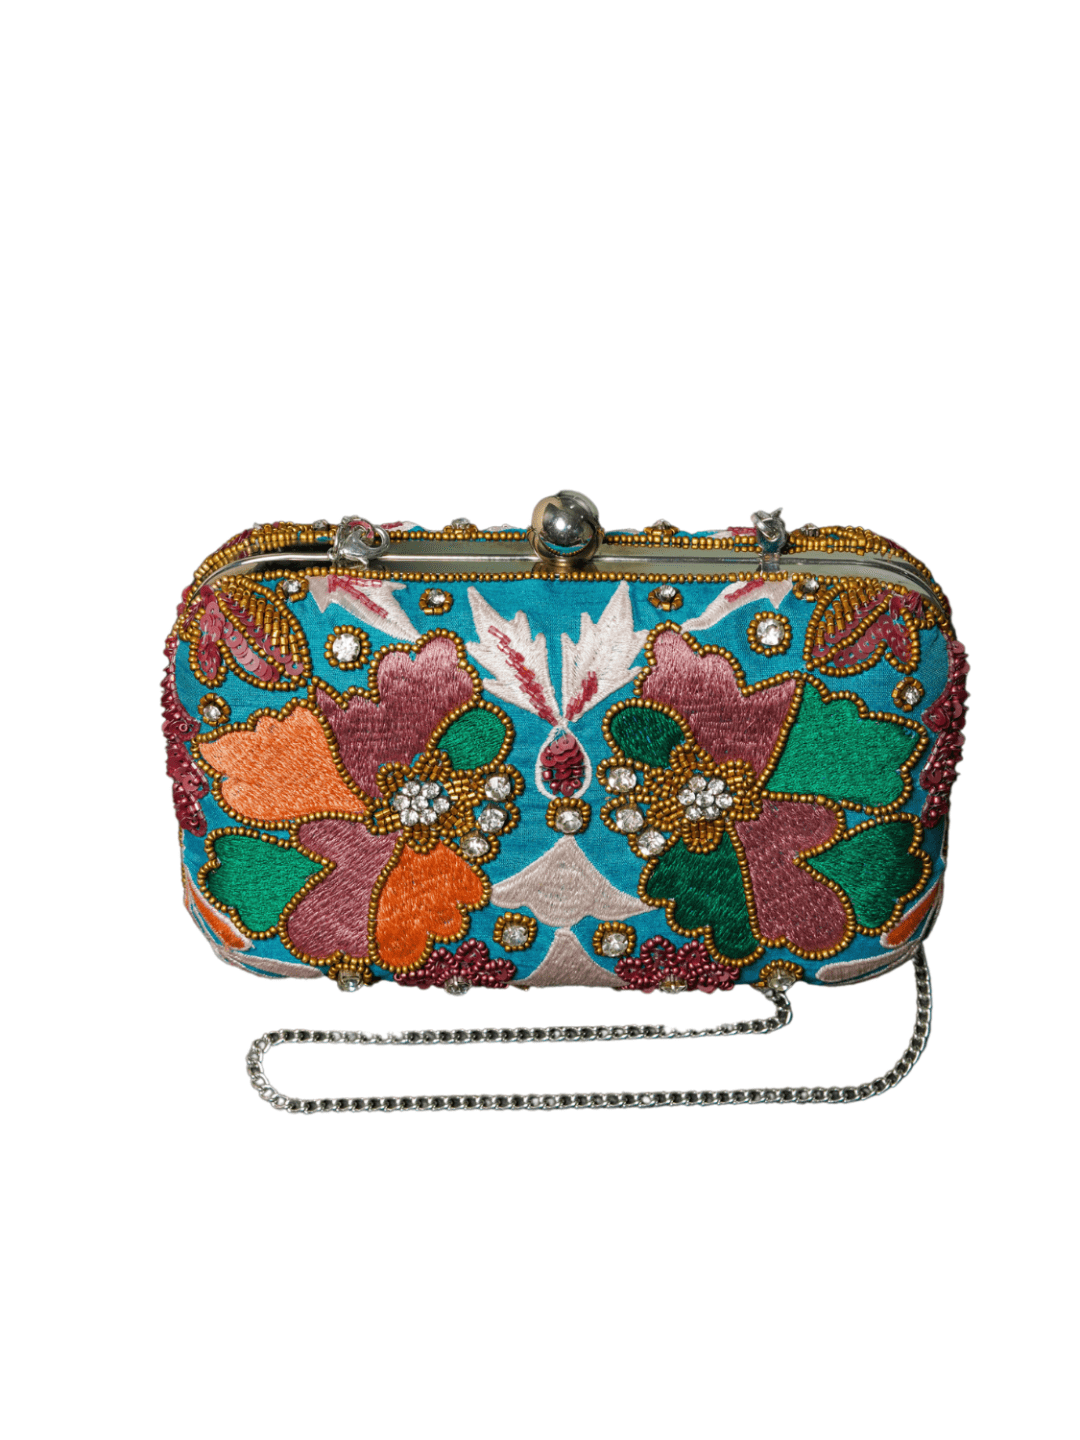 Multicolor Embroidered With White Stones Box Clutch